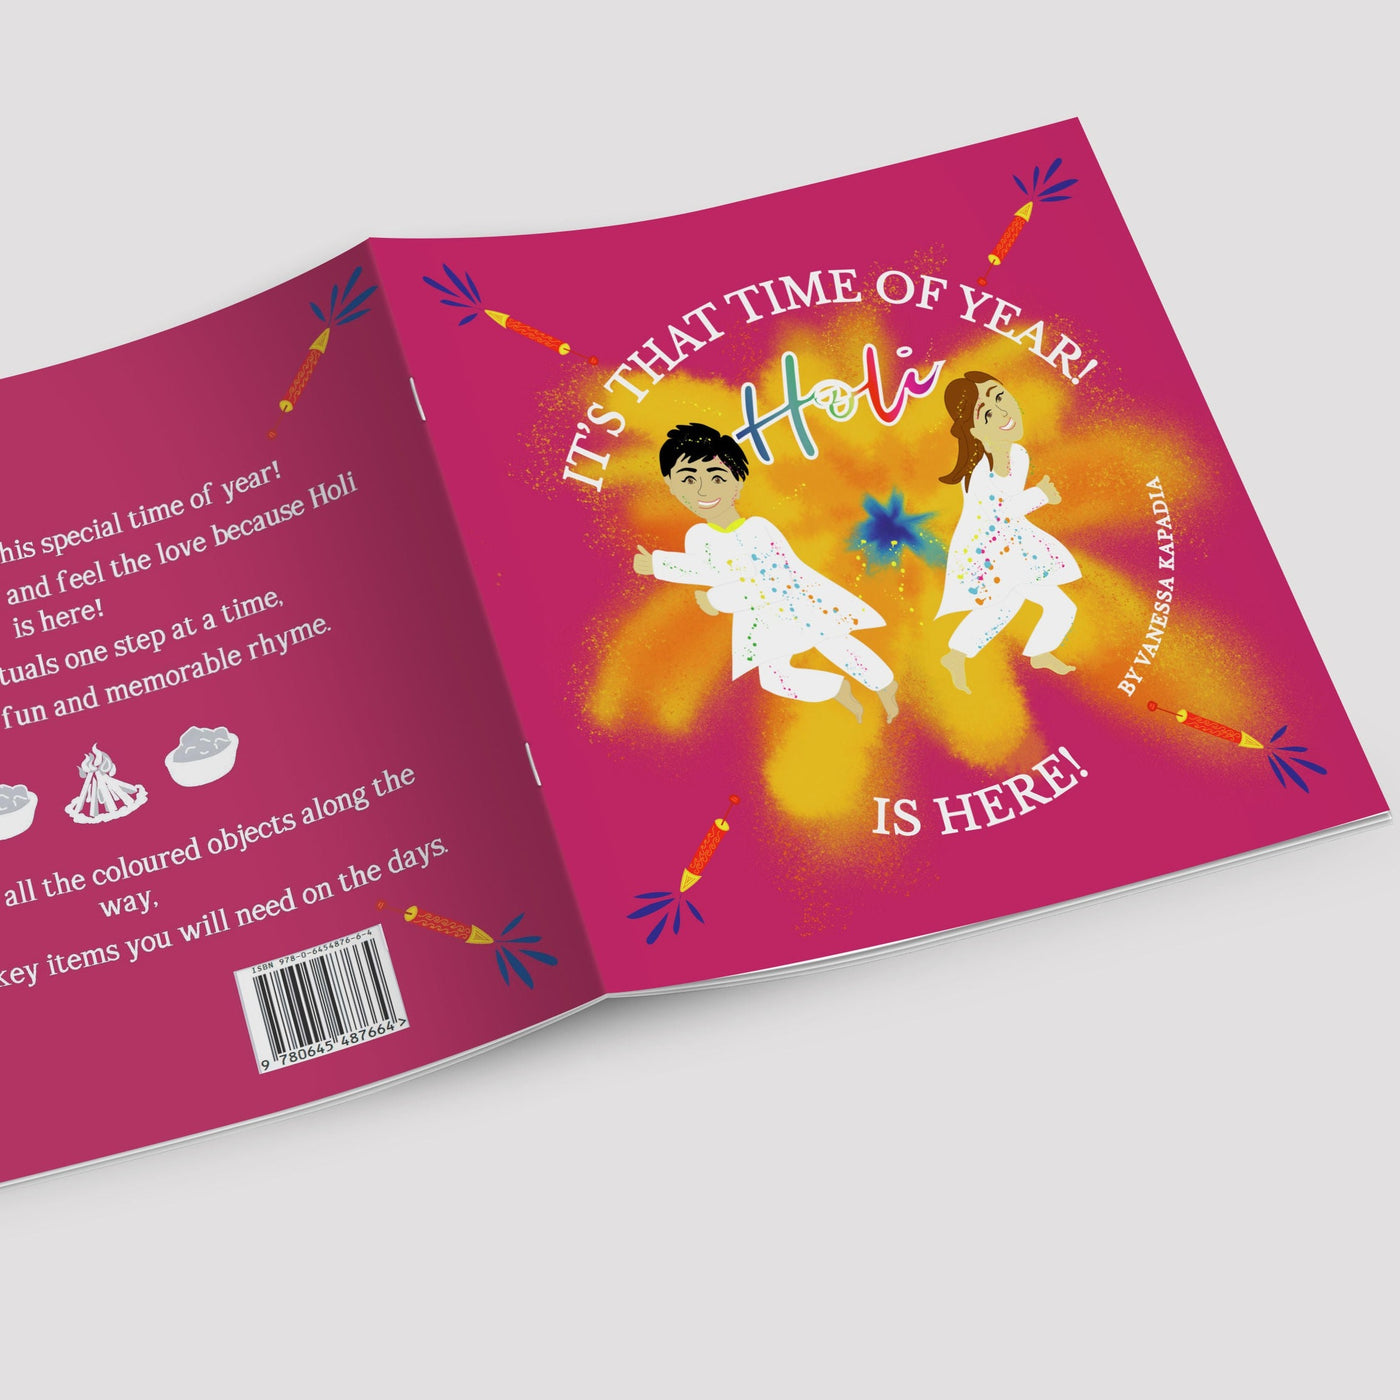 Holi Book by Time of Year series